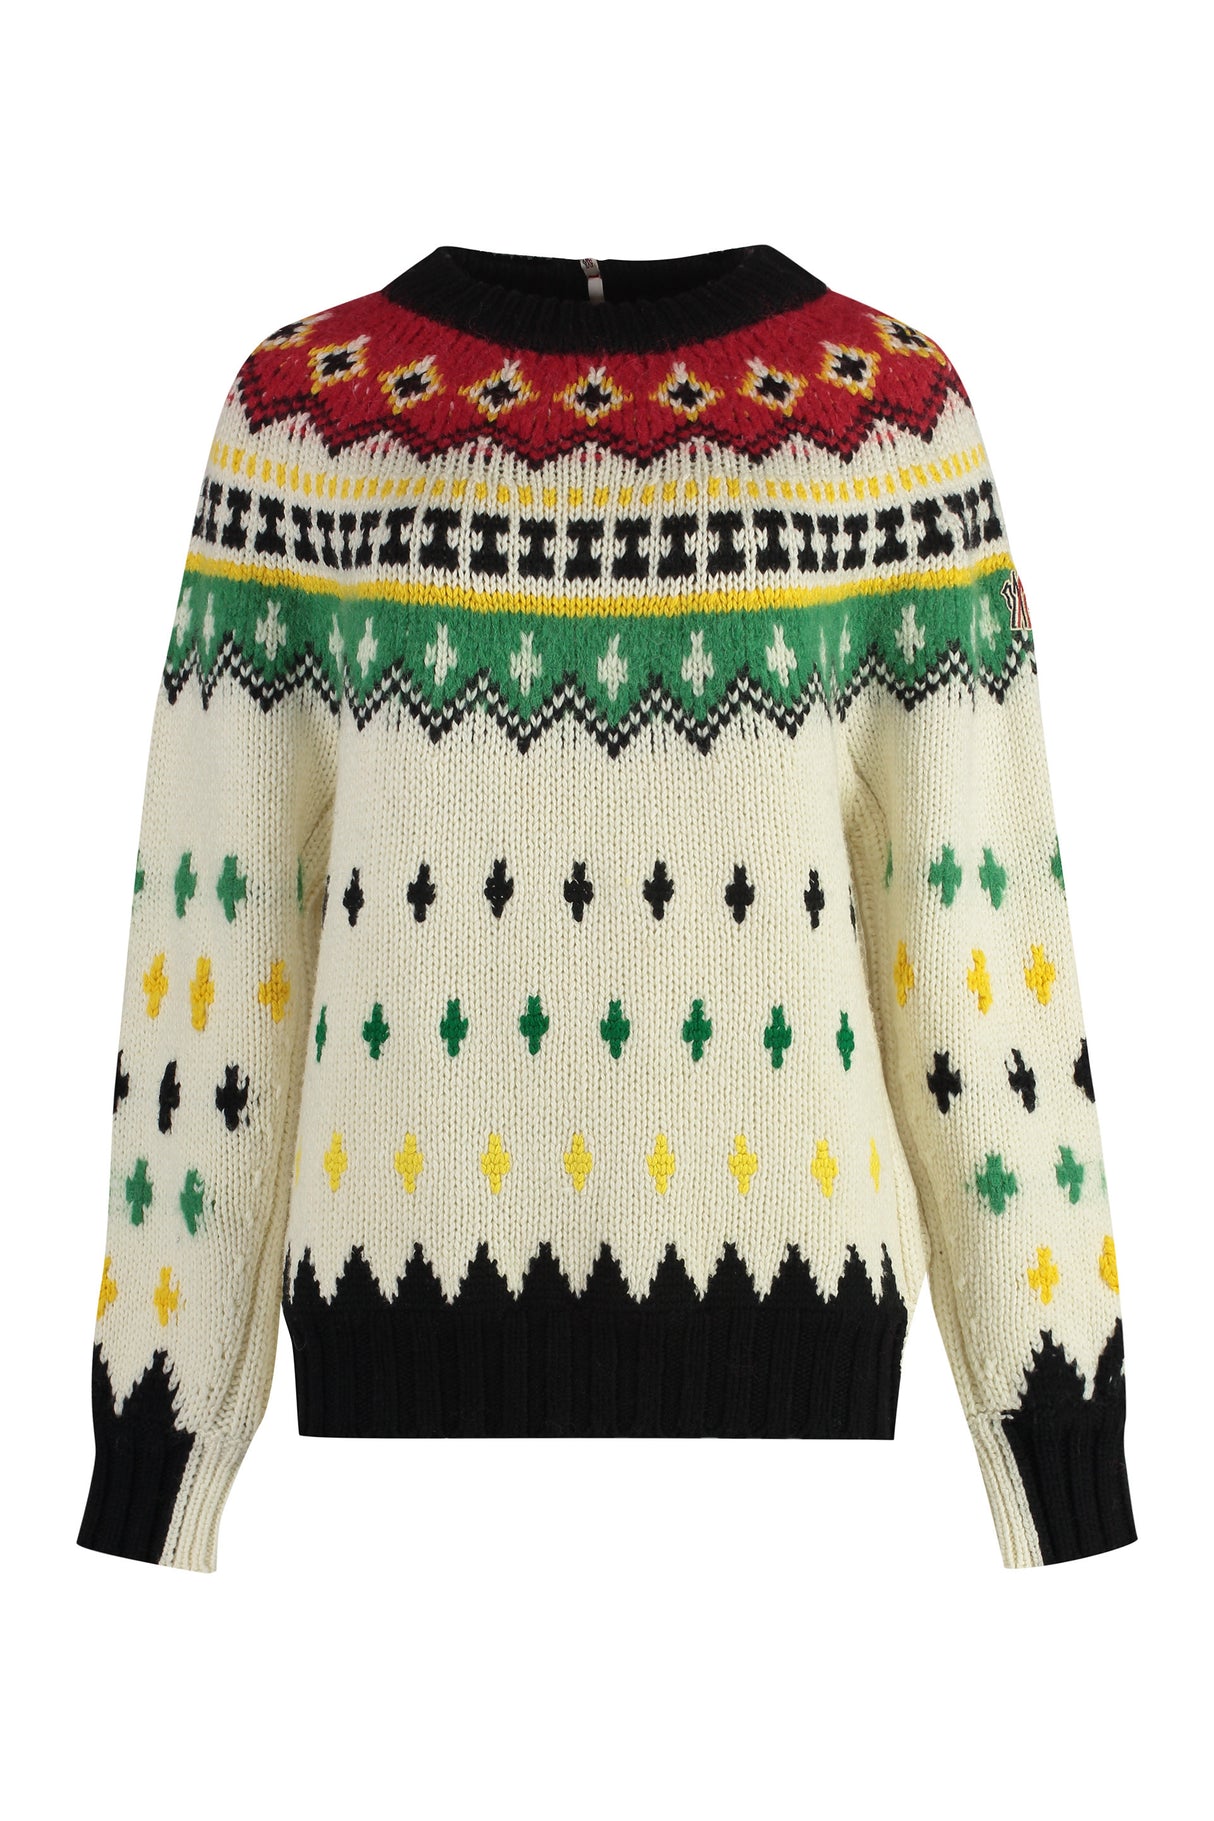 MONCLER GRENOBLE Multicolor Jacquard Wool Sweater for Women